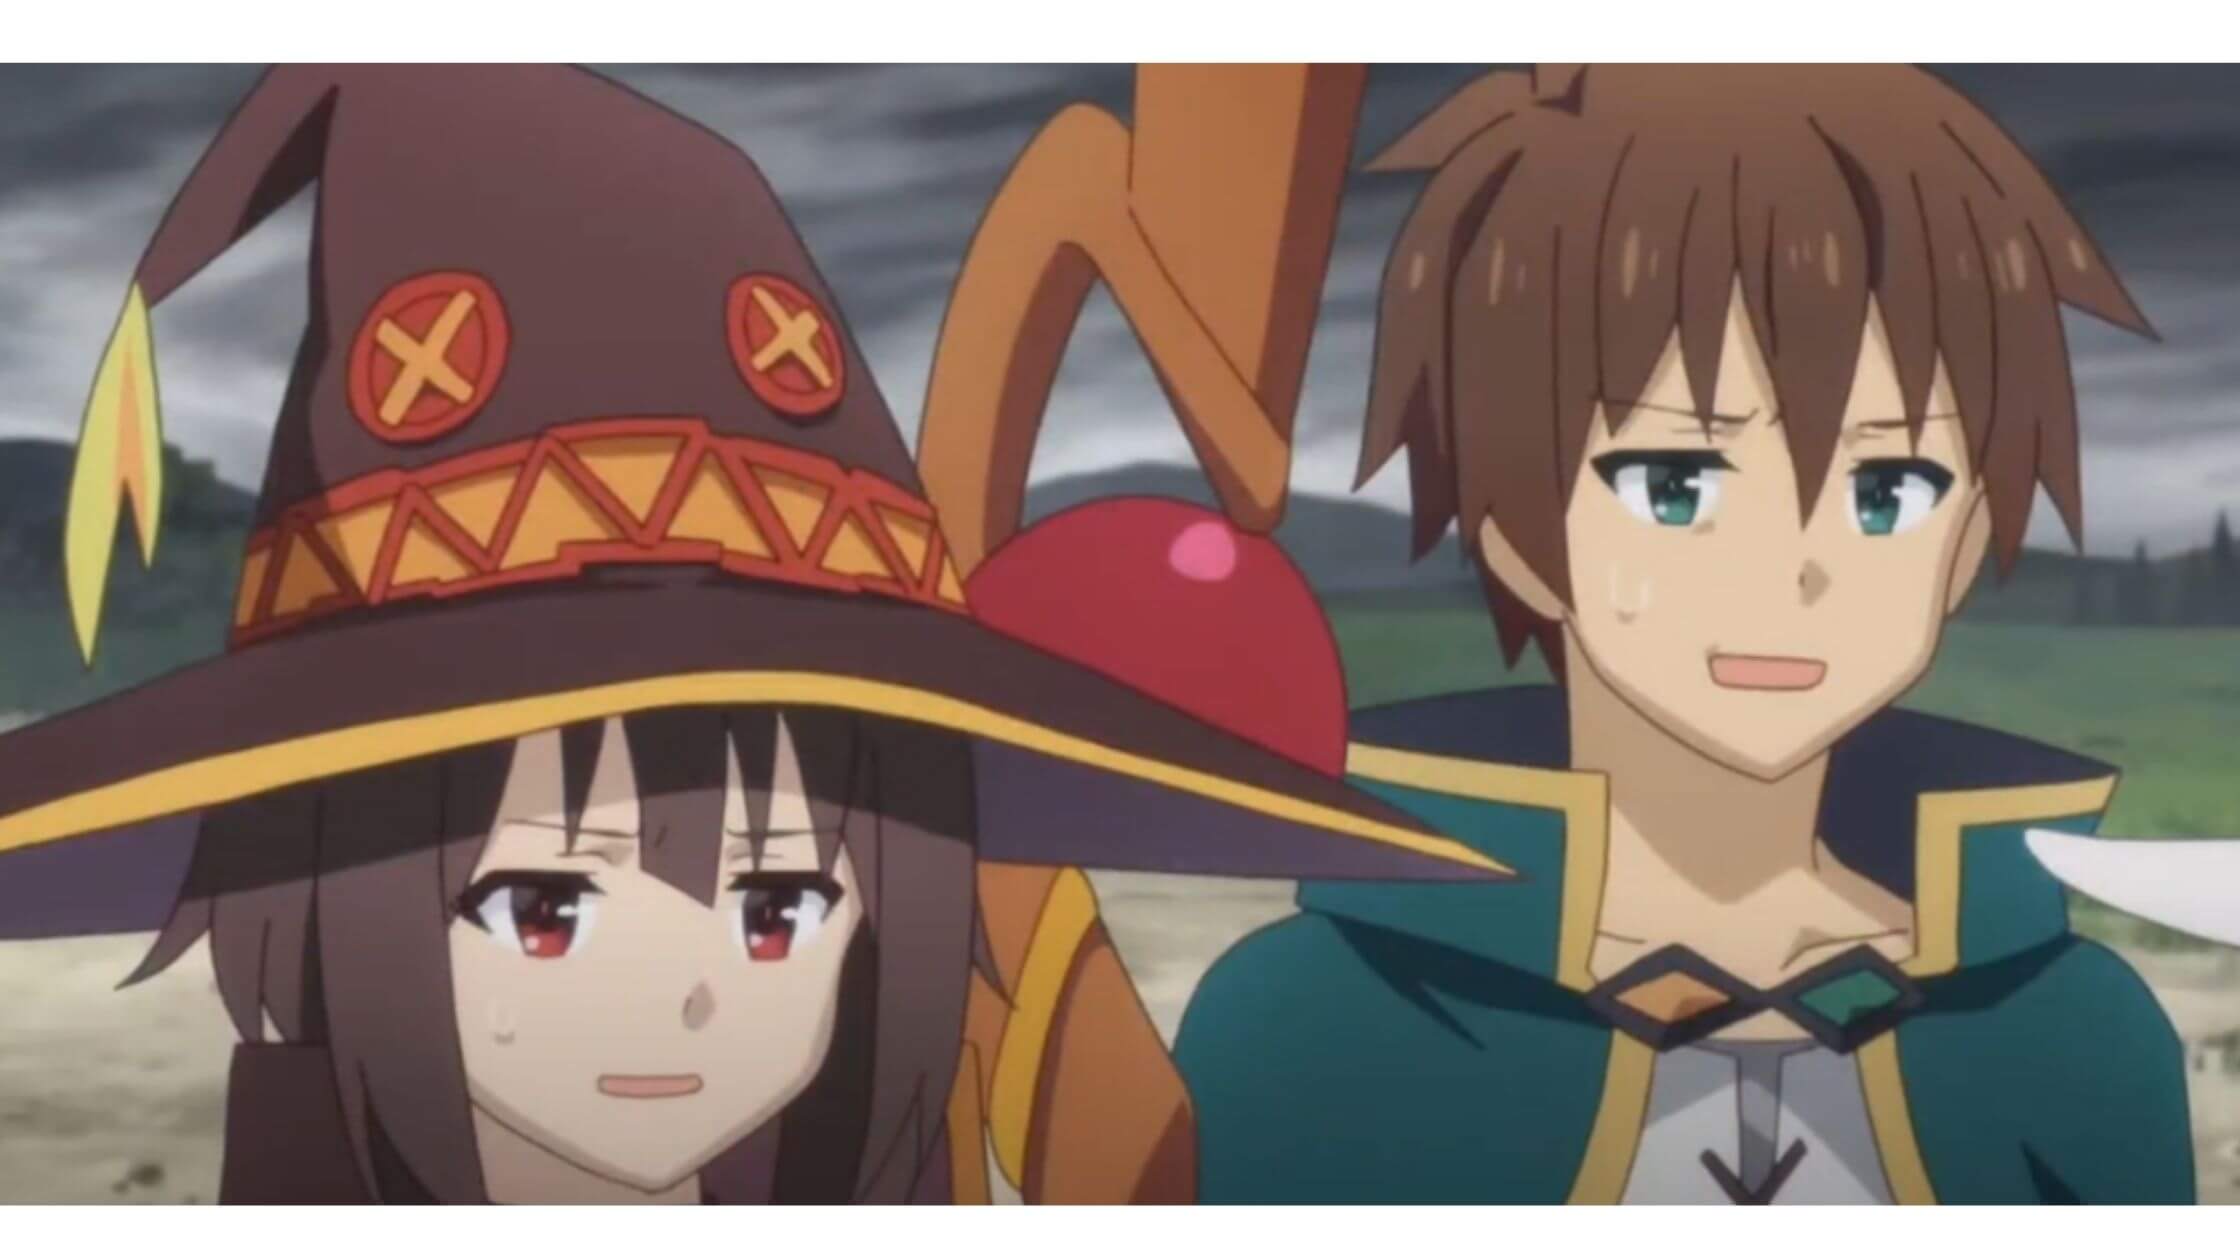 Confused-Does-Konosuba-Announce-A-New-Anime-Project-Or-Movie-Everything-You-Should-Know-About-Konosuba-Season-3-1